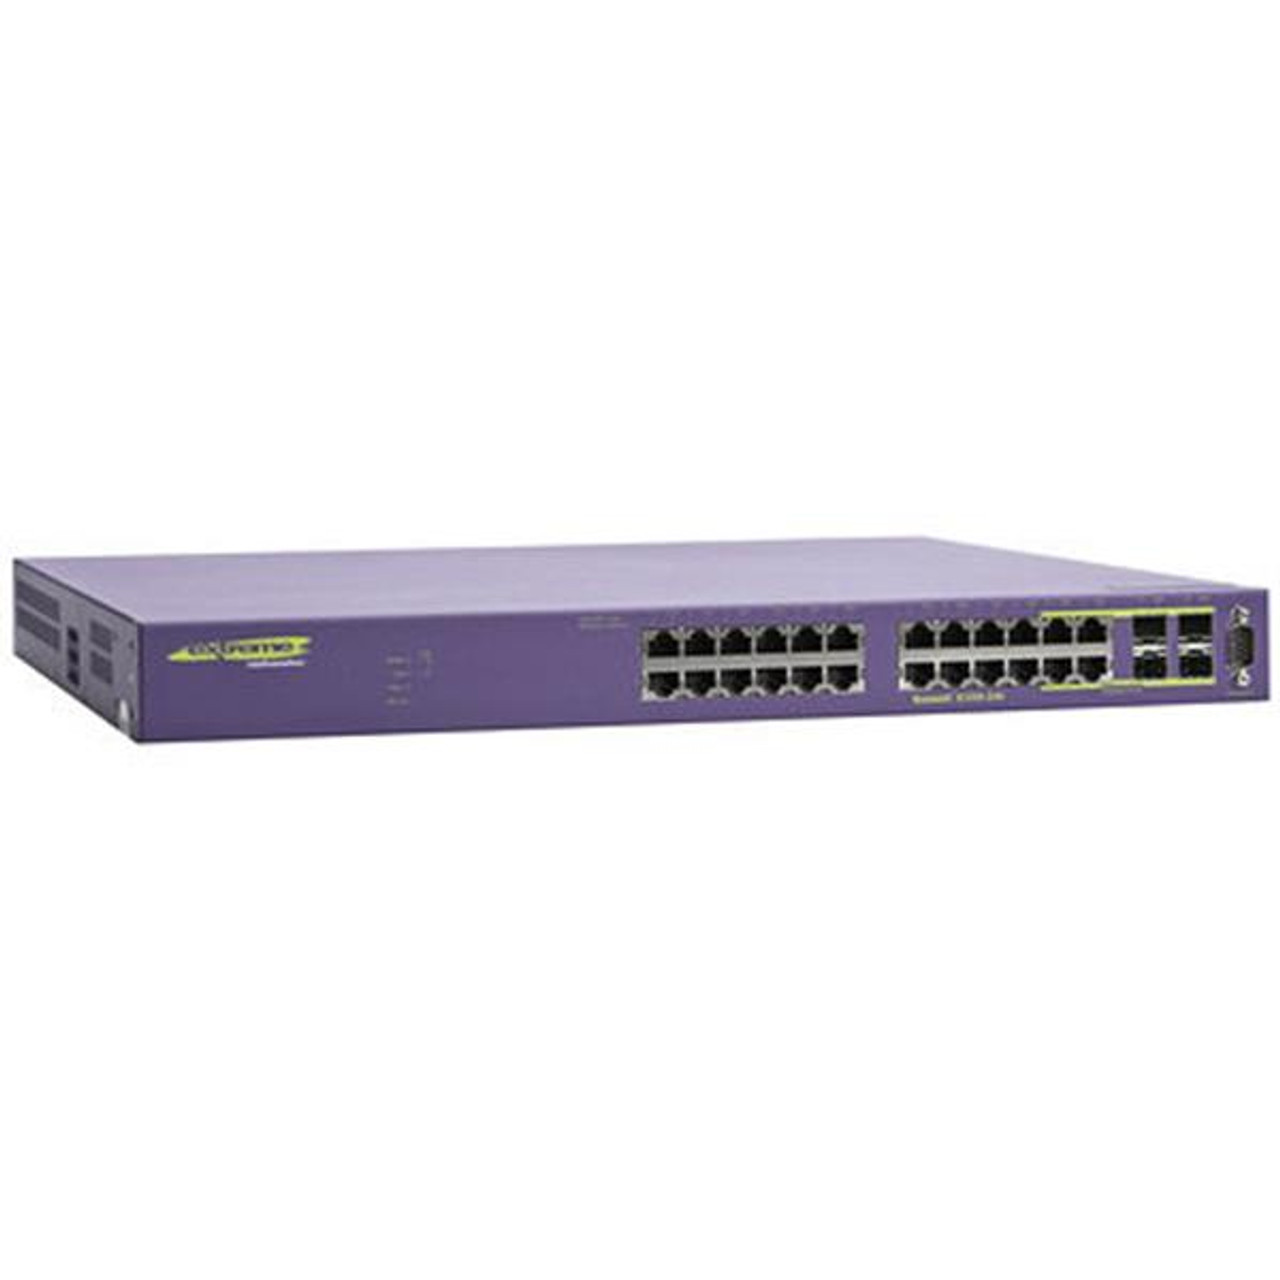 16201 Extreme Networks Summit X350-24t 24-Ports 10/100/1000 Gigabit Switch with SFP Ports (Refurbished)